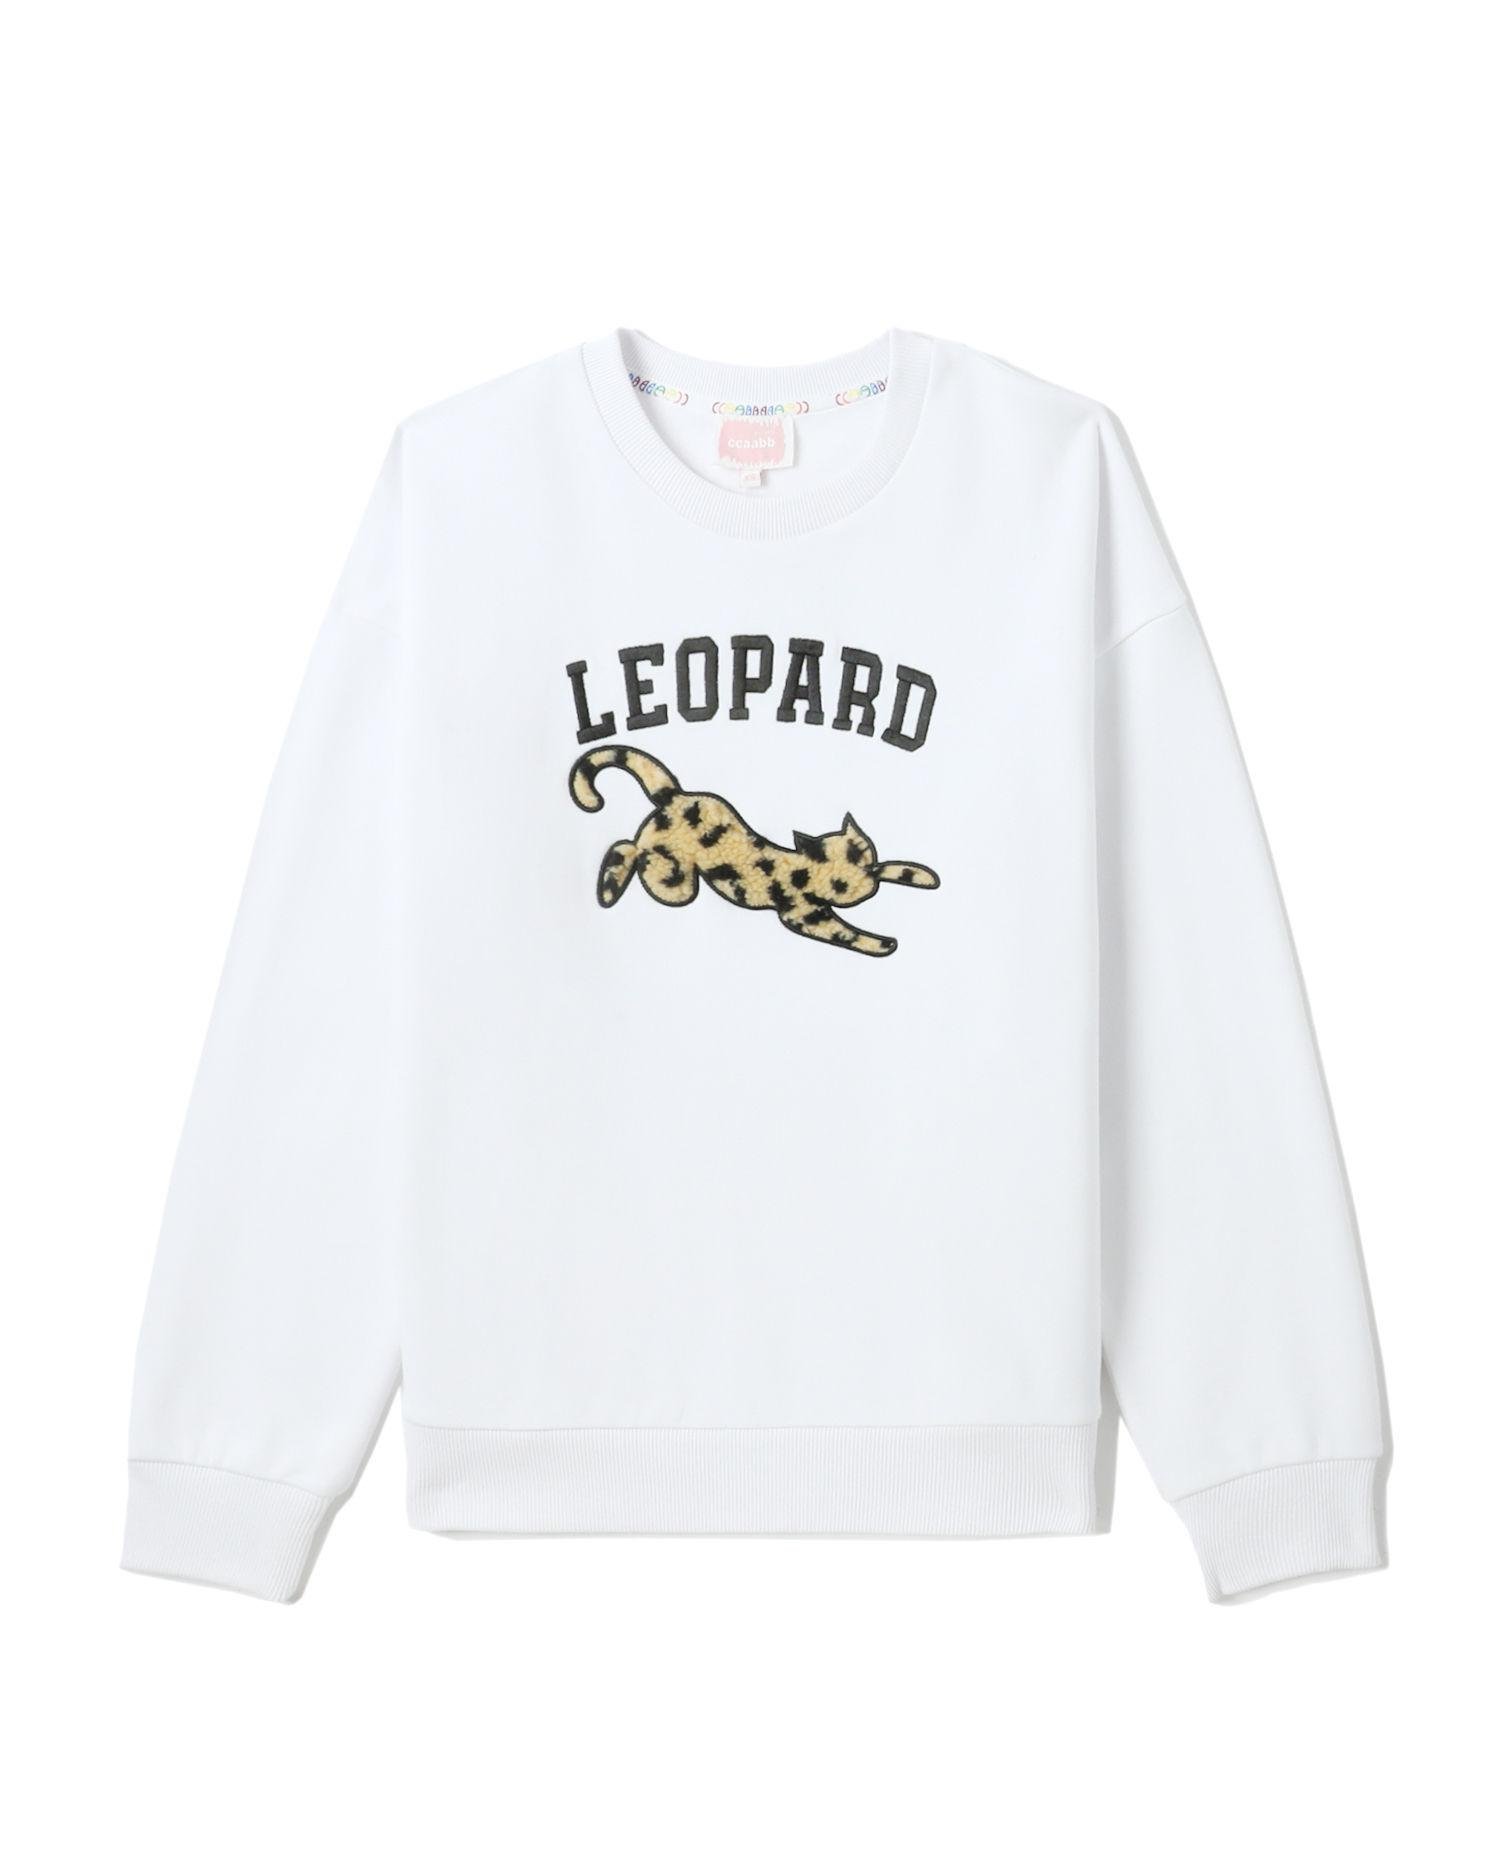 Leopard graphic embroidered sweatshirt by CCAABB